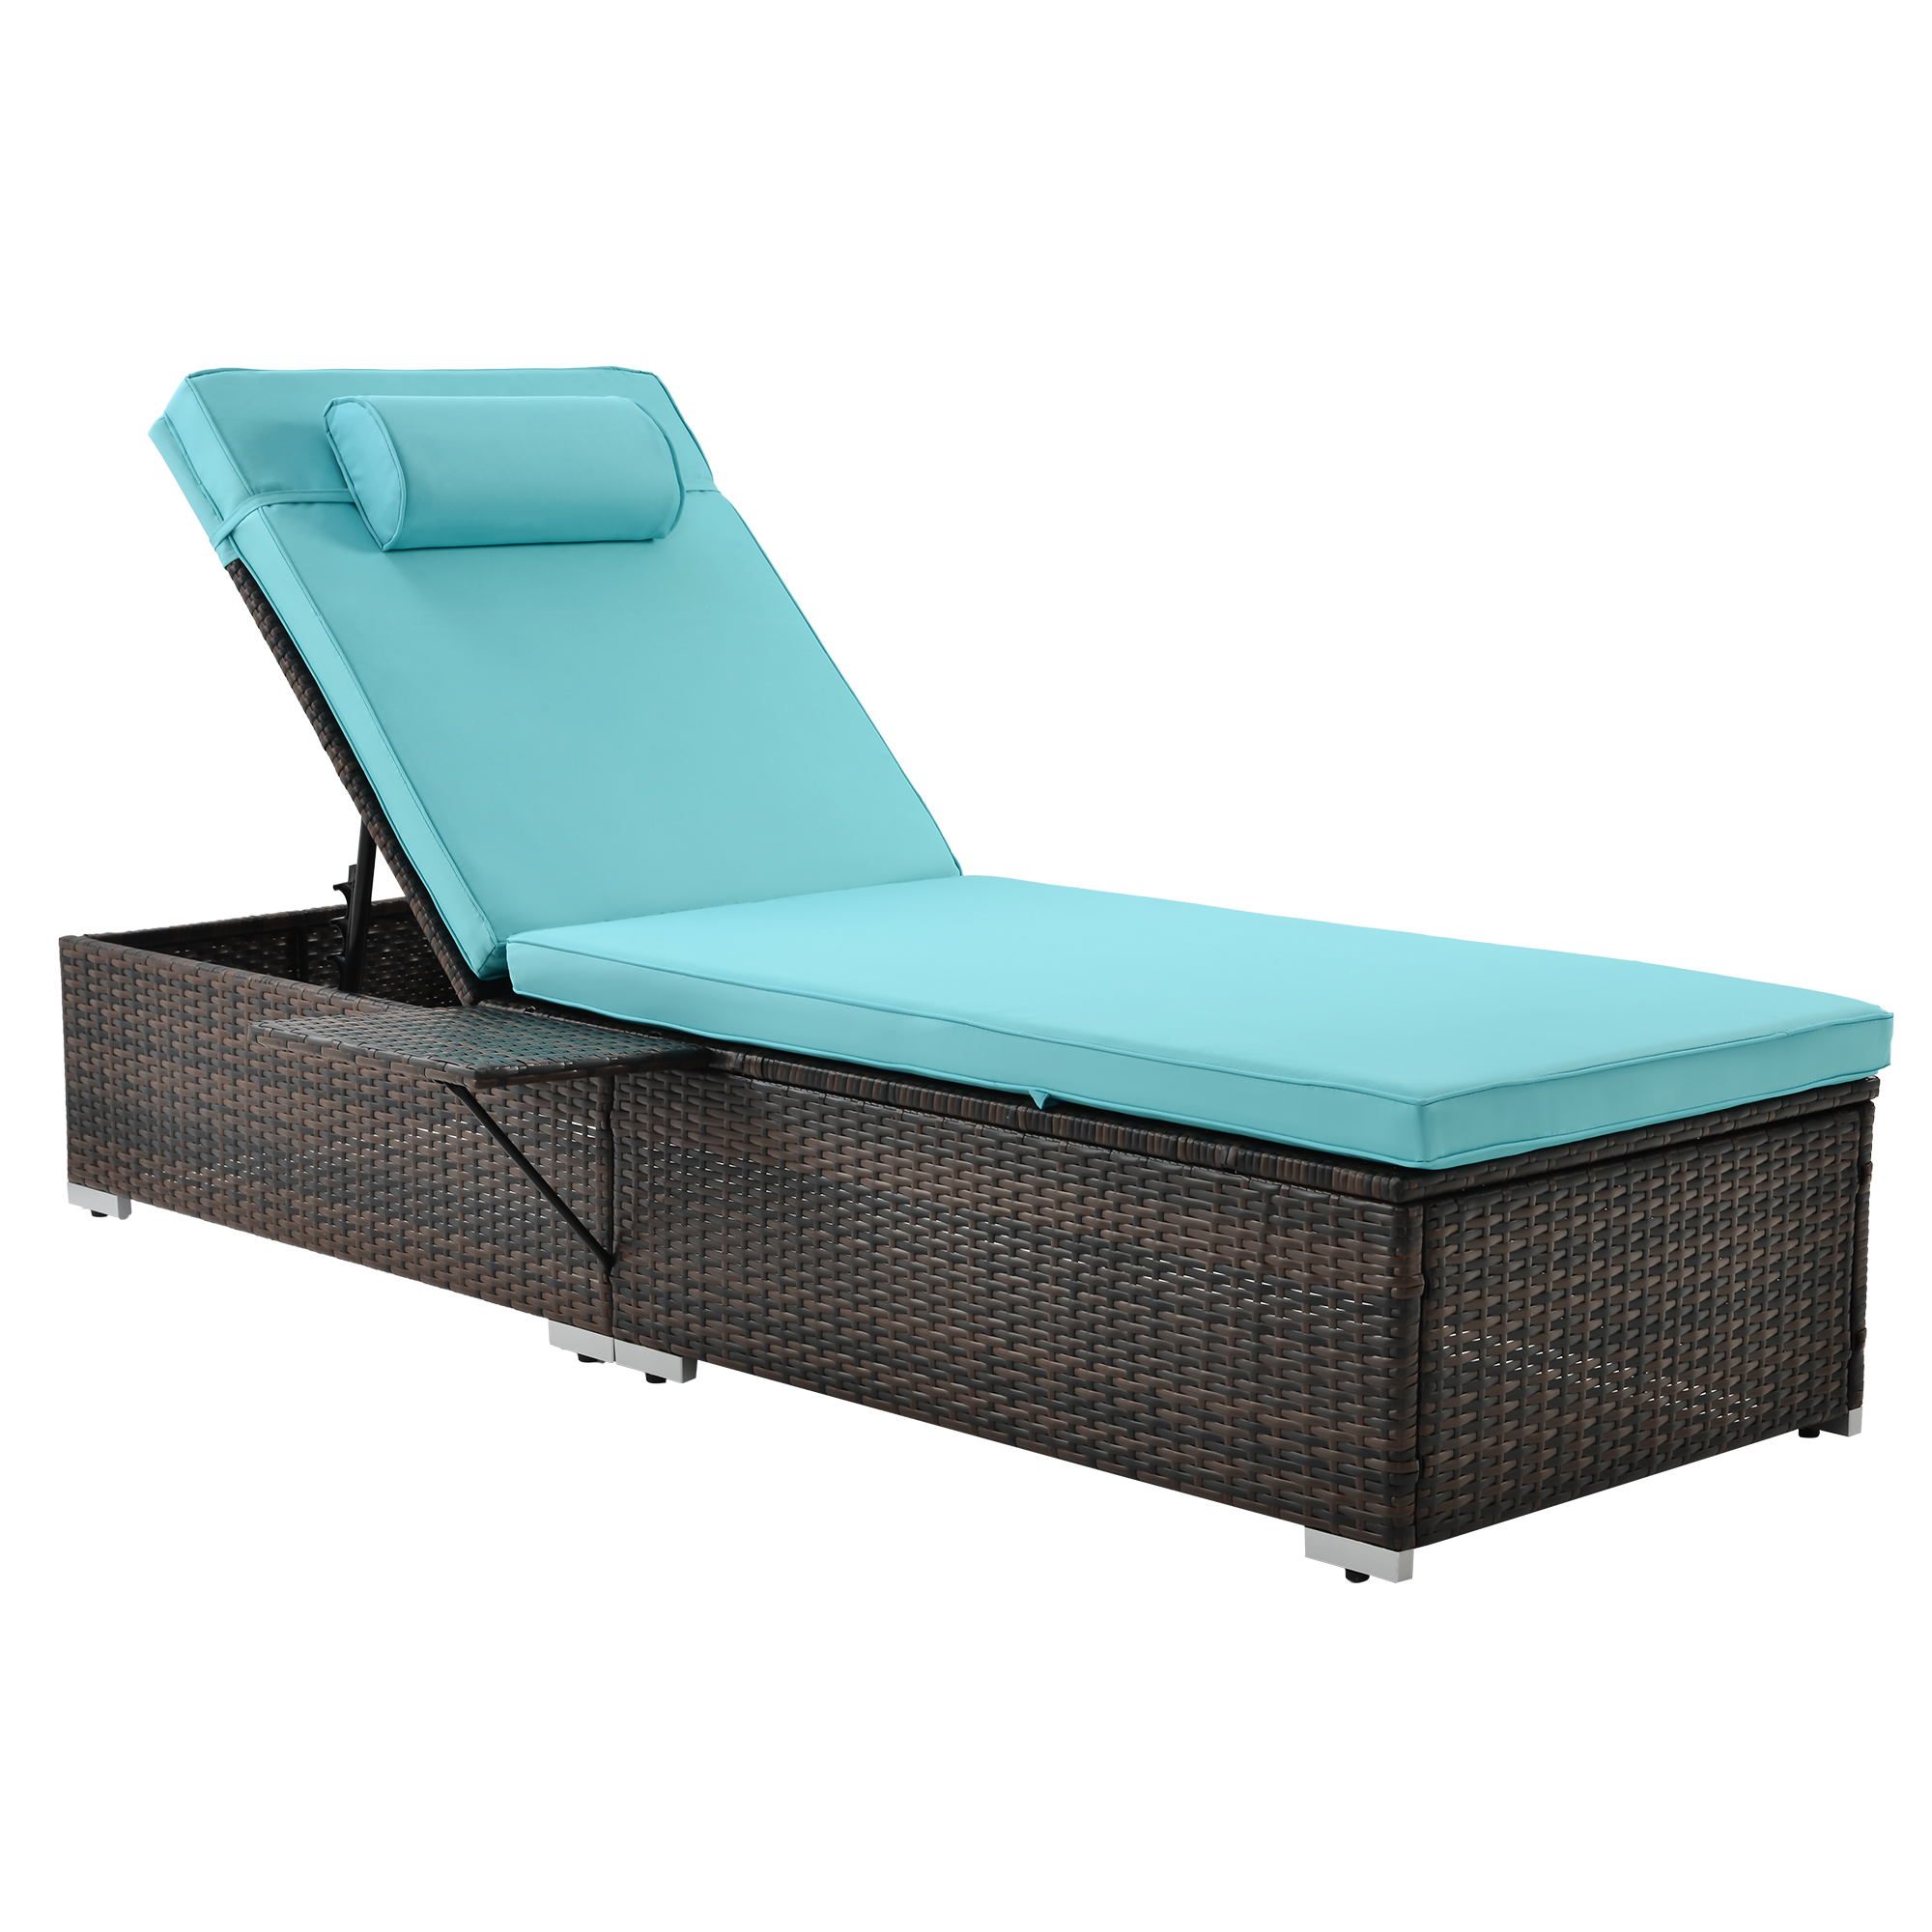 ENYOPRO 2 Pieces Wicker Patio Lounge Chair Set, Adjustable PE Rattan Chaise Lounge with Side Table and Cushion, Outdoor Lounger Recliner for Garden, Balcony, Poolside, Patio, Deck, Backyard - image 3 of 10